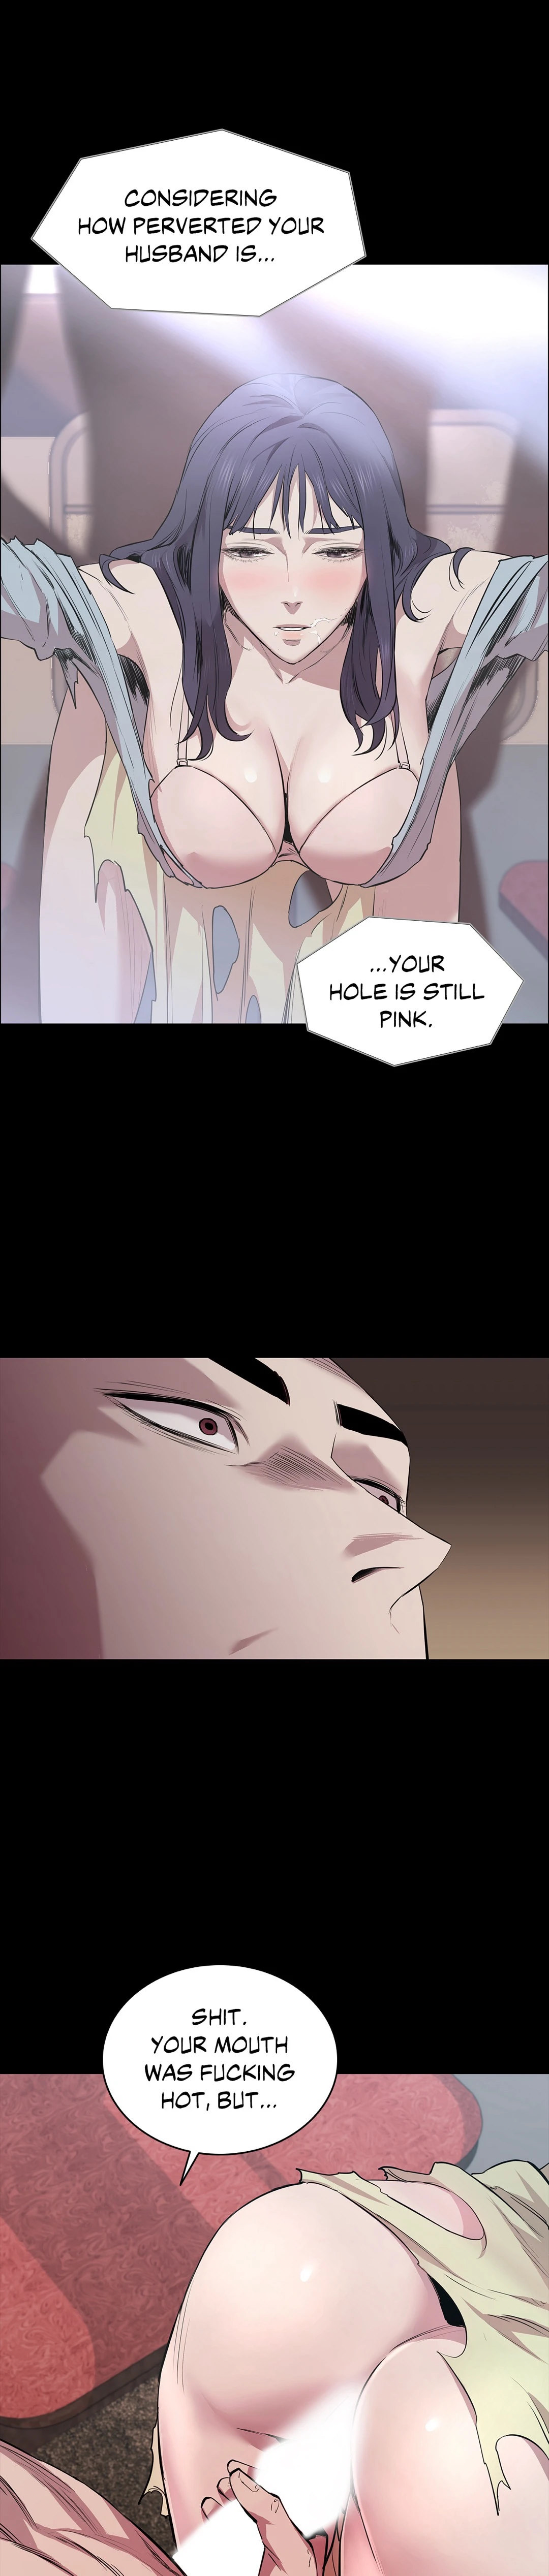 Thorns on Innocence - Chapter 21 Page 2